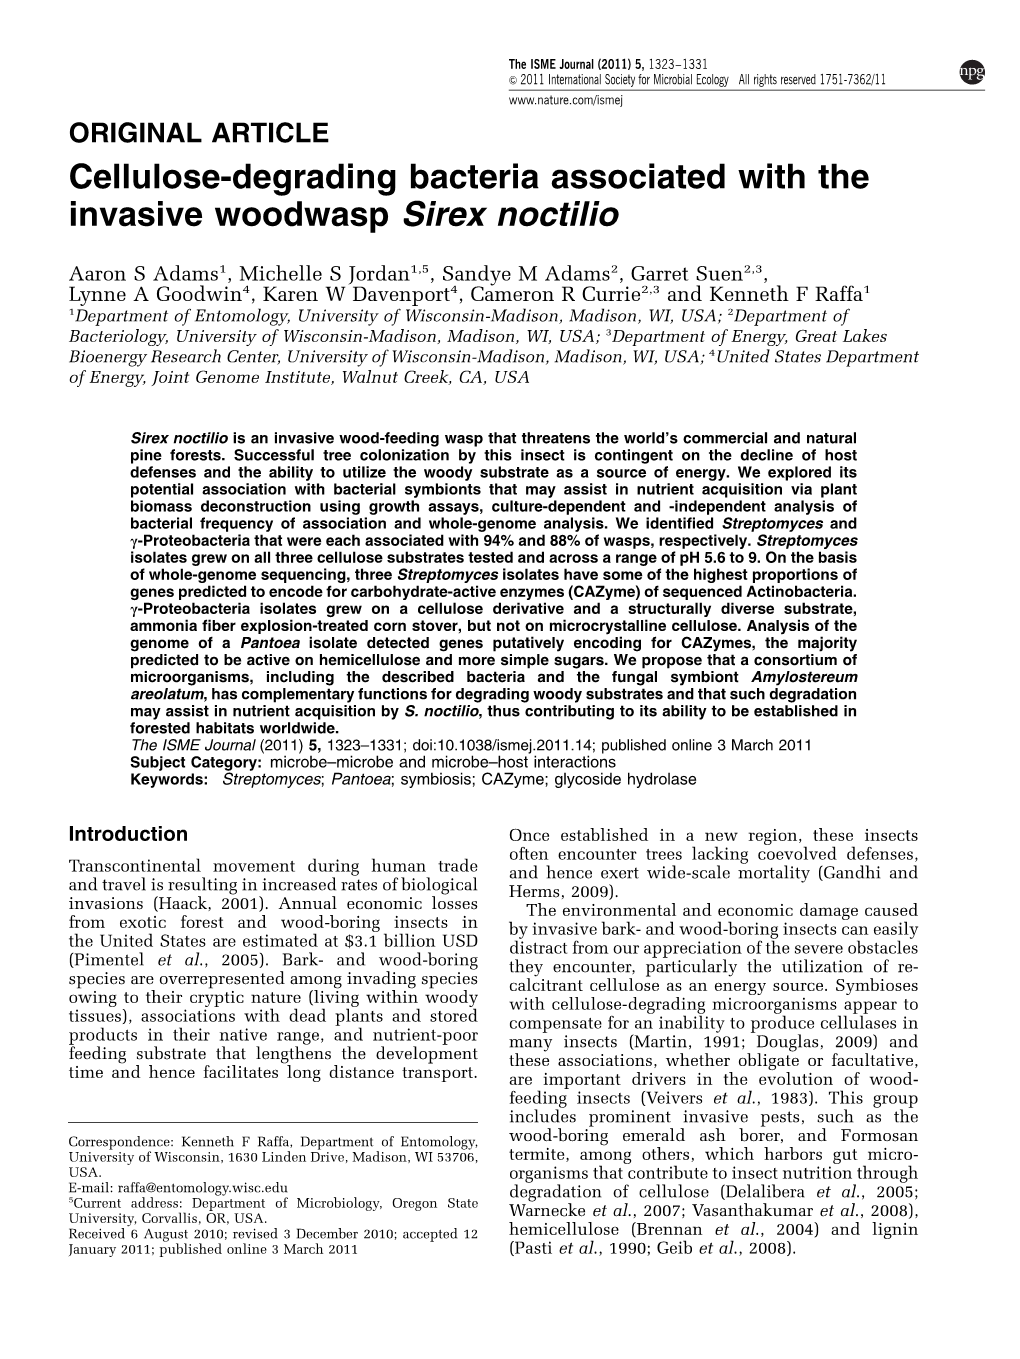 Cellulose-Degrading Bacteria Associated with the Invasive Woodwasp Sirex Noctilio